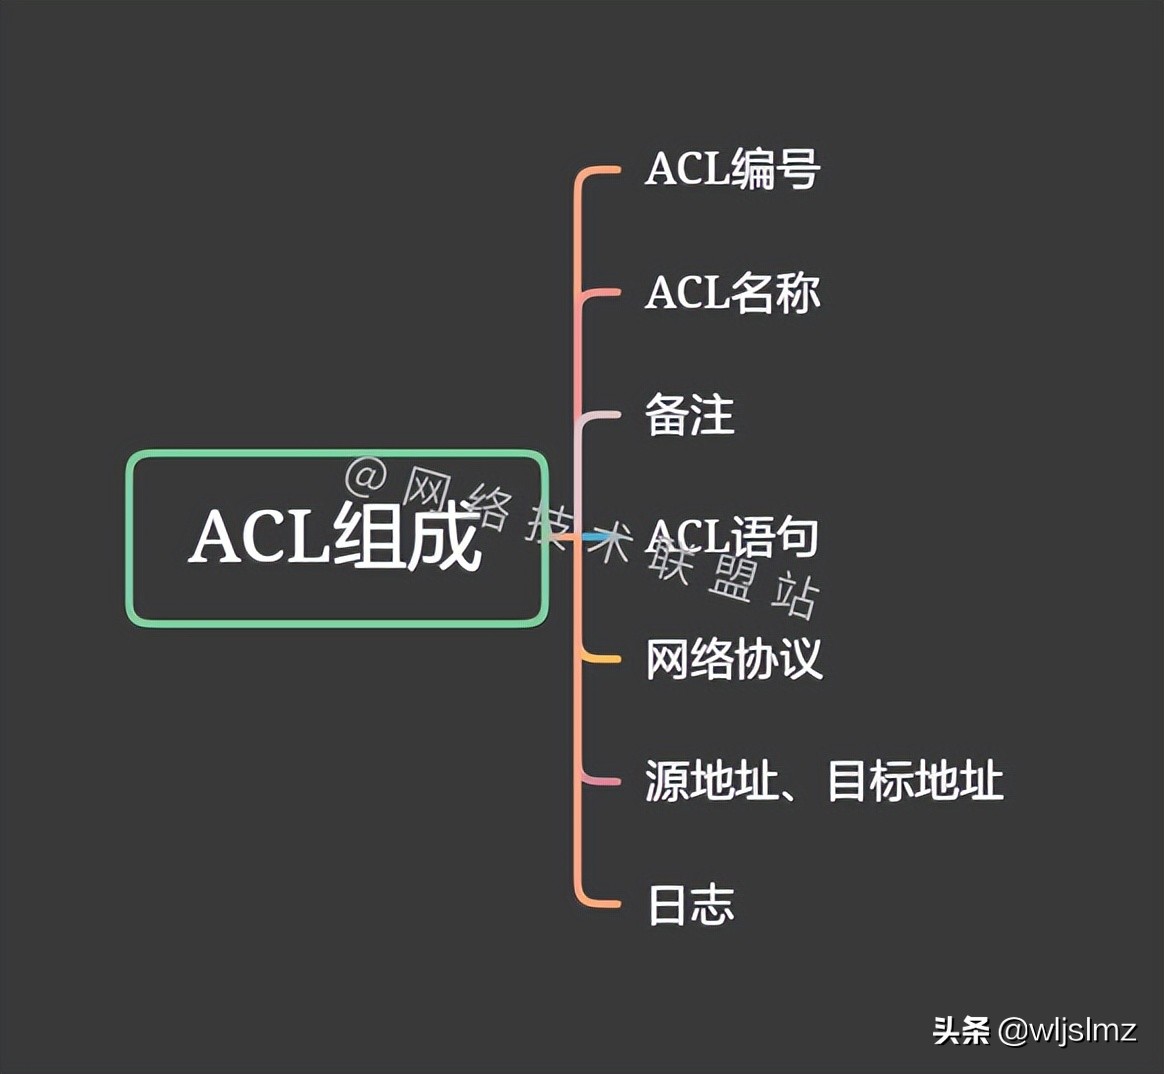 Graphical network: access control list ACL, the function is comparable to a firewall